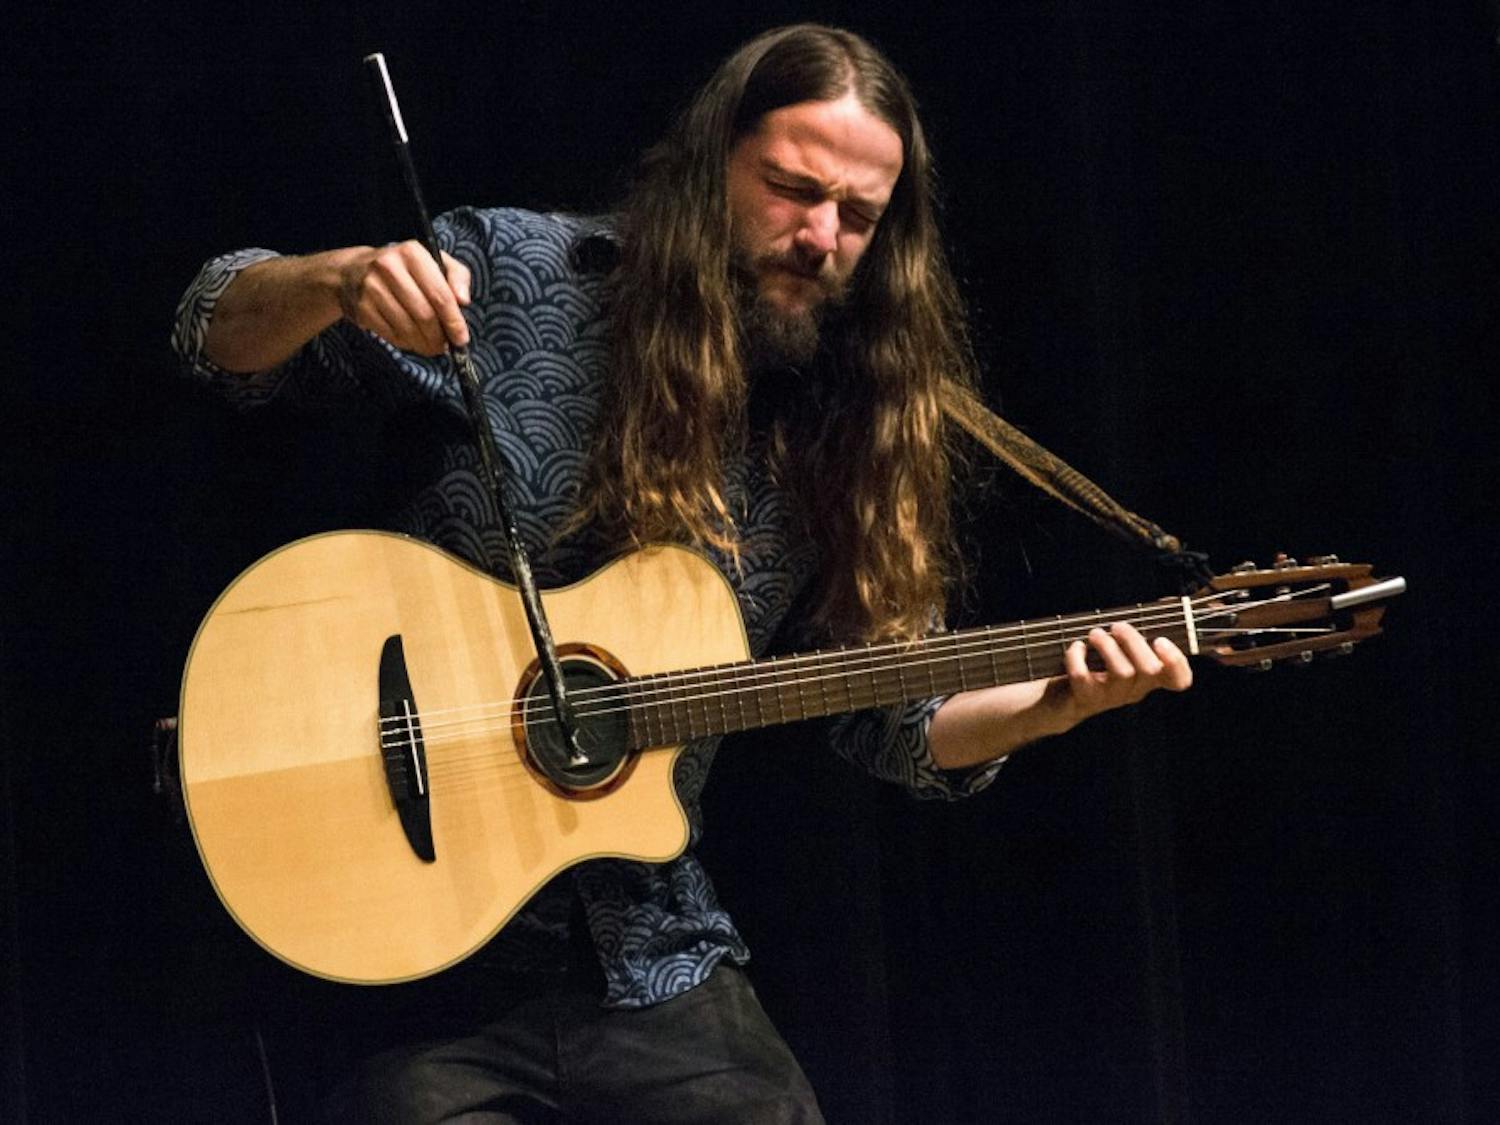 Nano Stern plays Chilean songs during the Latin Series Concert at the National Hispanic Cultural Center on Sunday. Stern is a new wave musician from Chile.